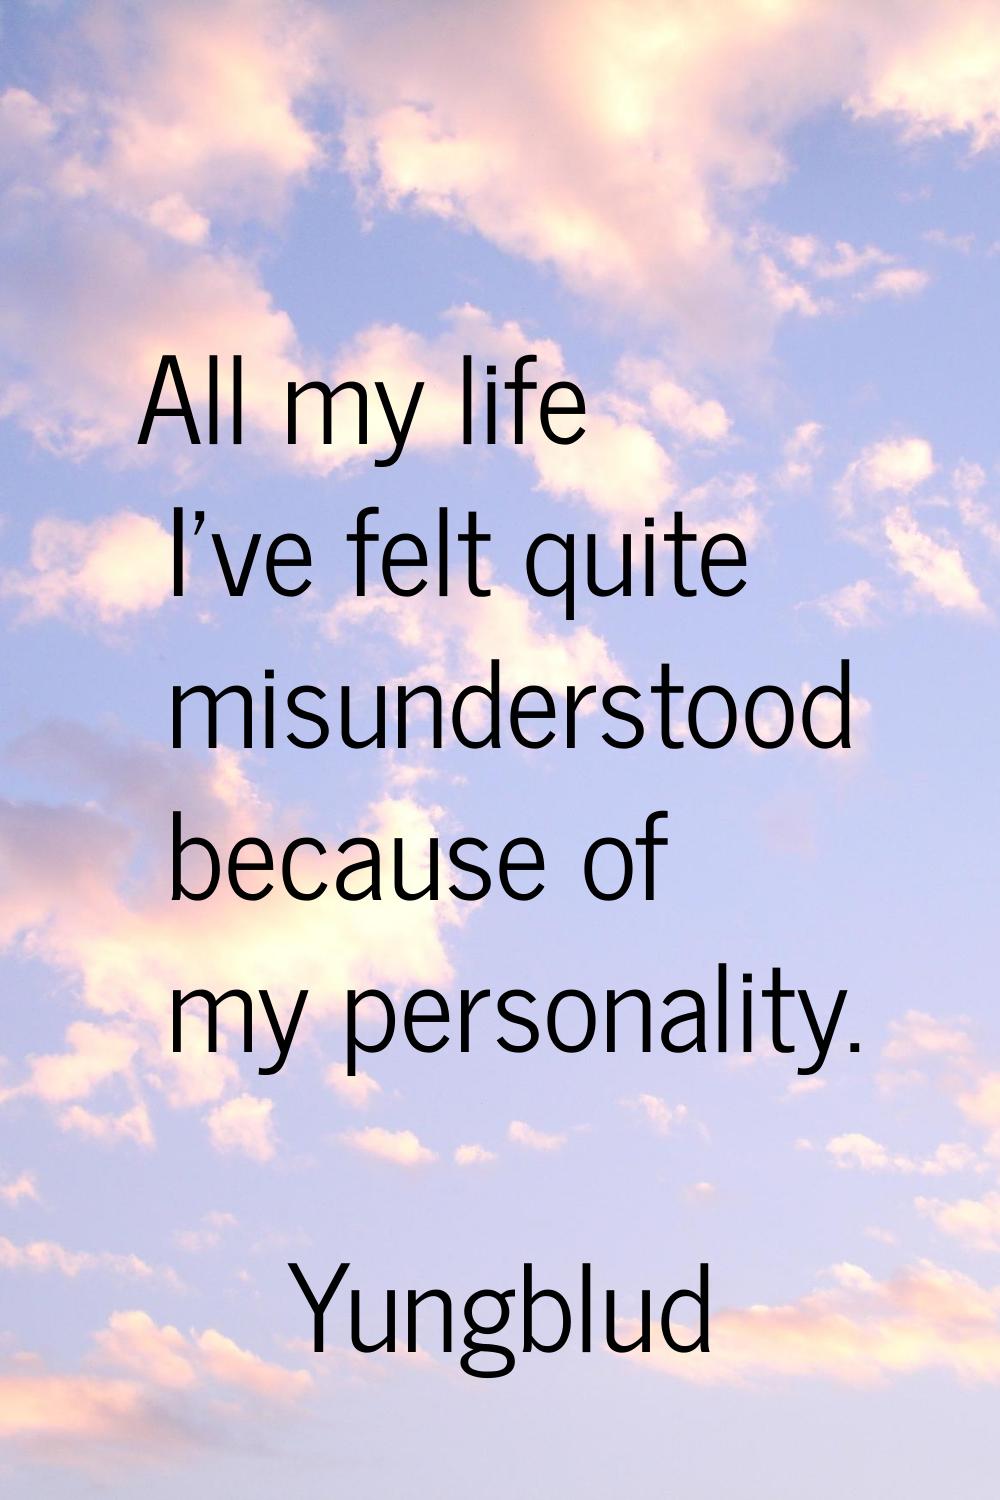 All my life I've felt quite misunderstood because of my personality.